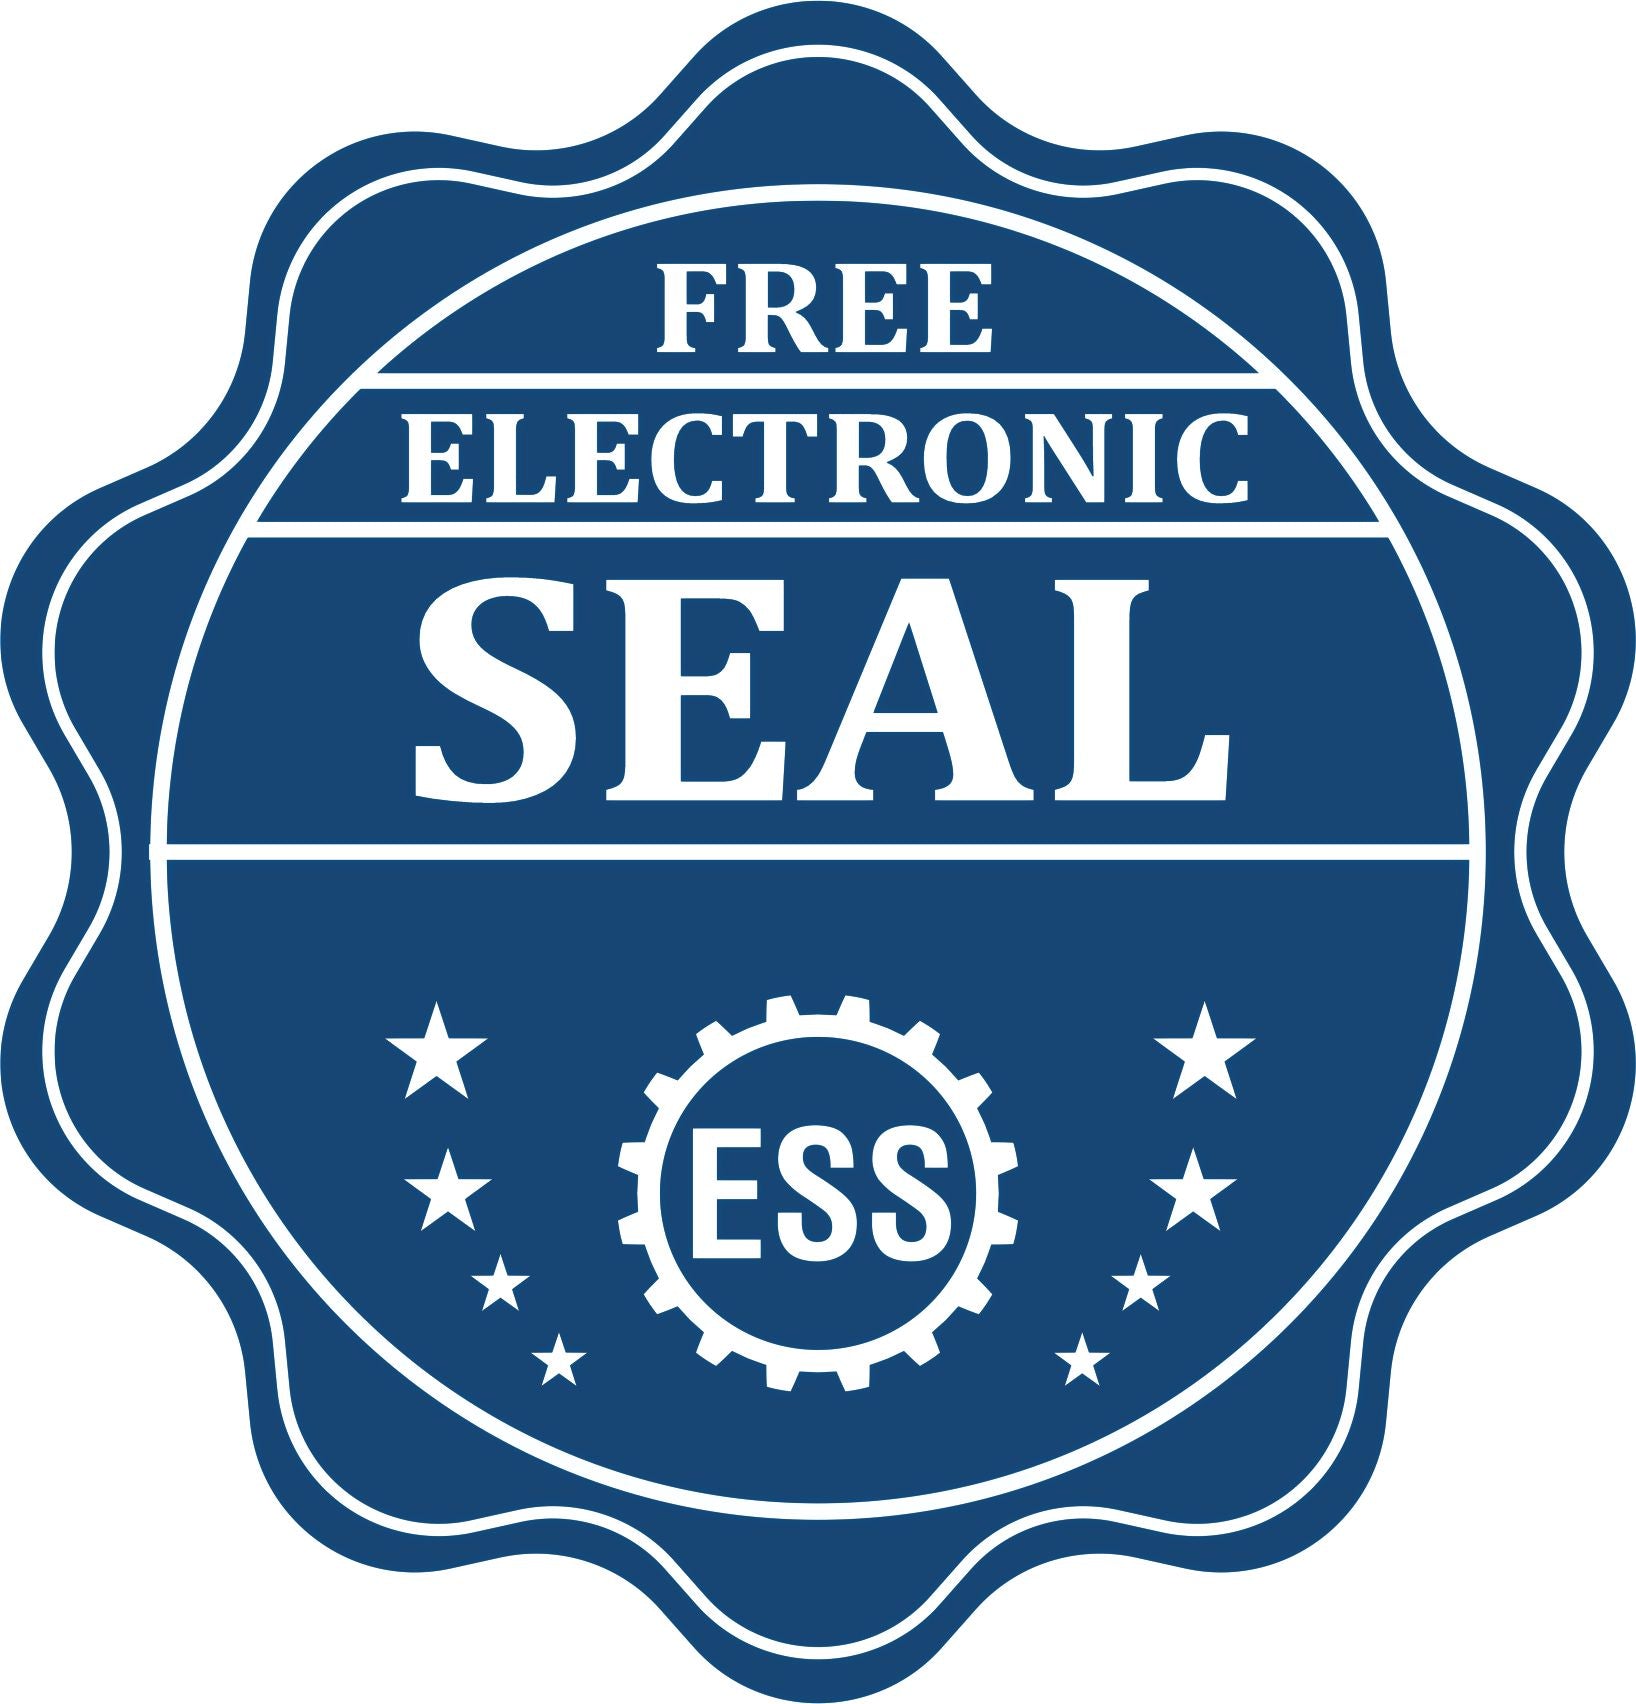 A badge showing a free electronic seal for the Premium MaxLight Pre-Inked Alabama Landscape Architectural Stamp with stars and the ESS gear on the emblem.